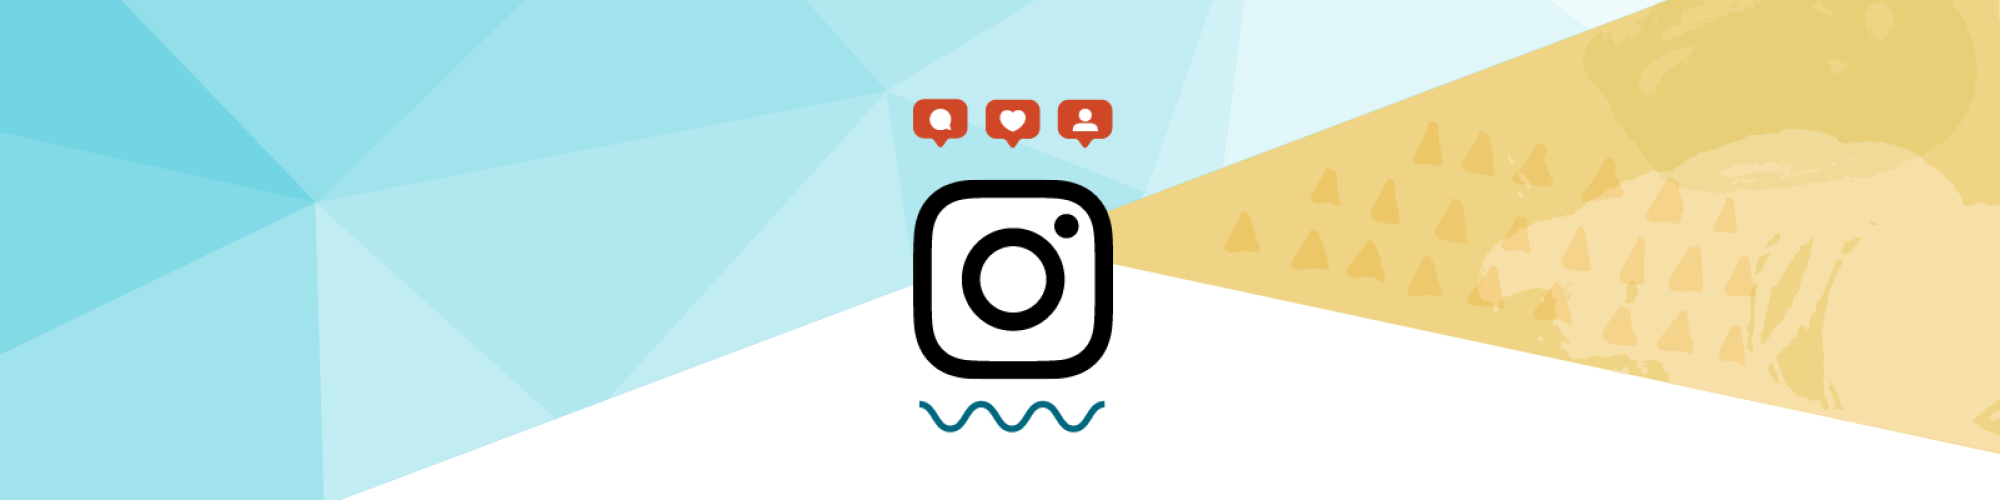 Geometric and illustrative graphic with Intstagram icon